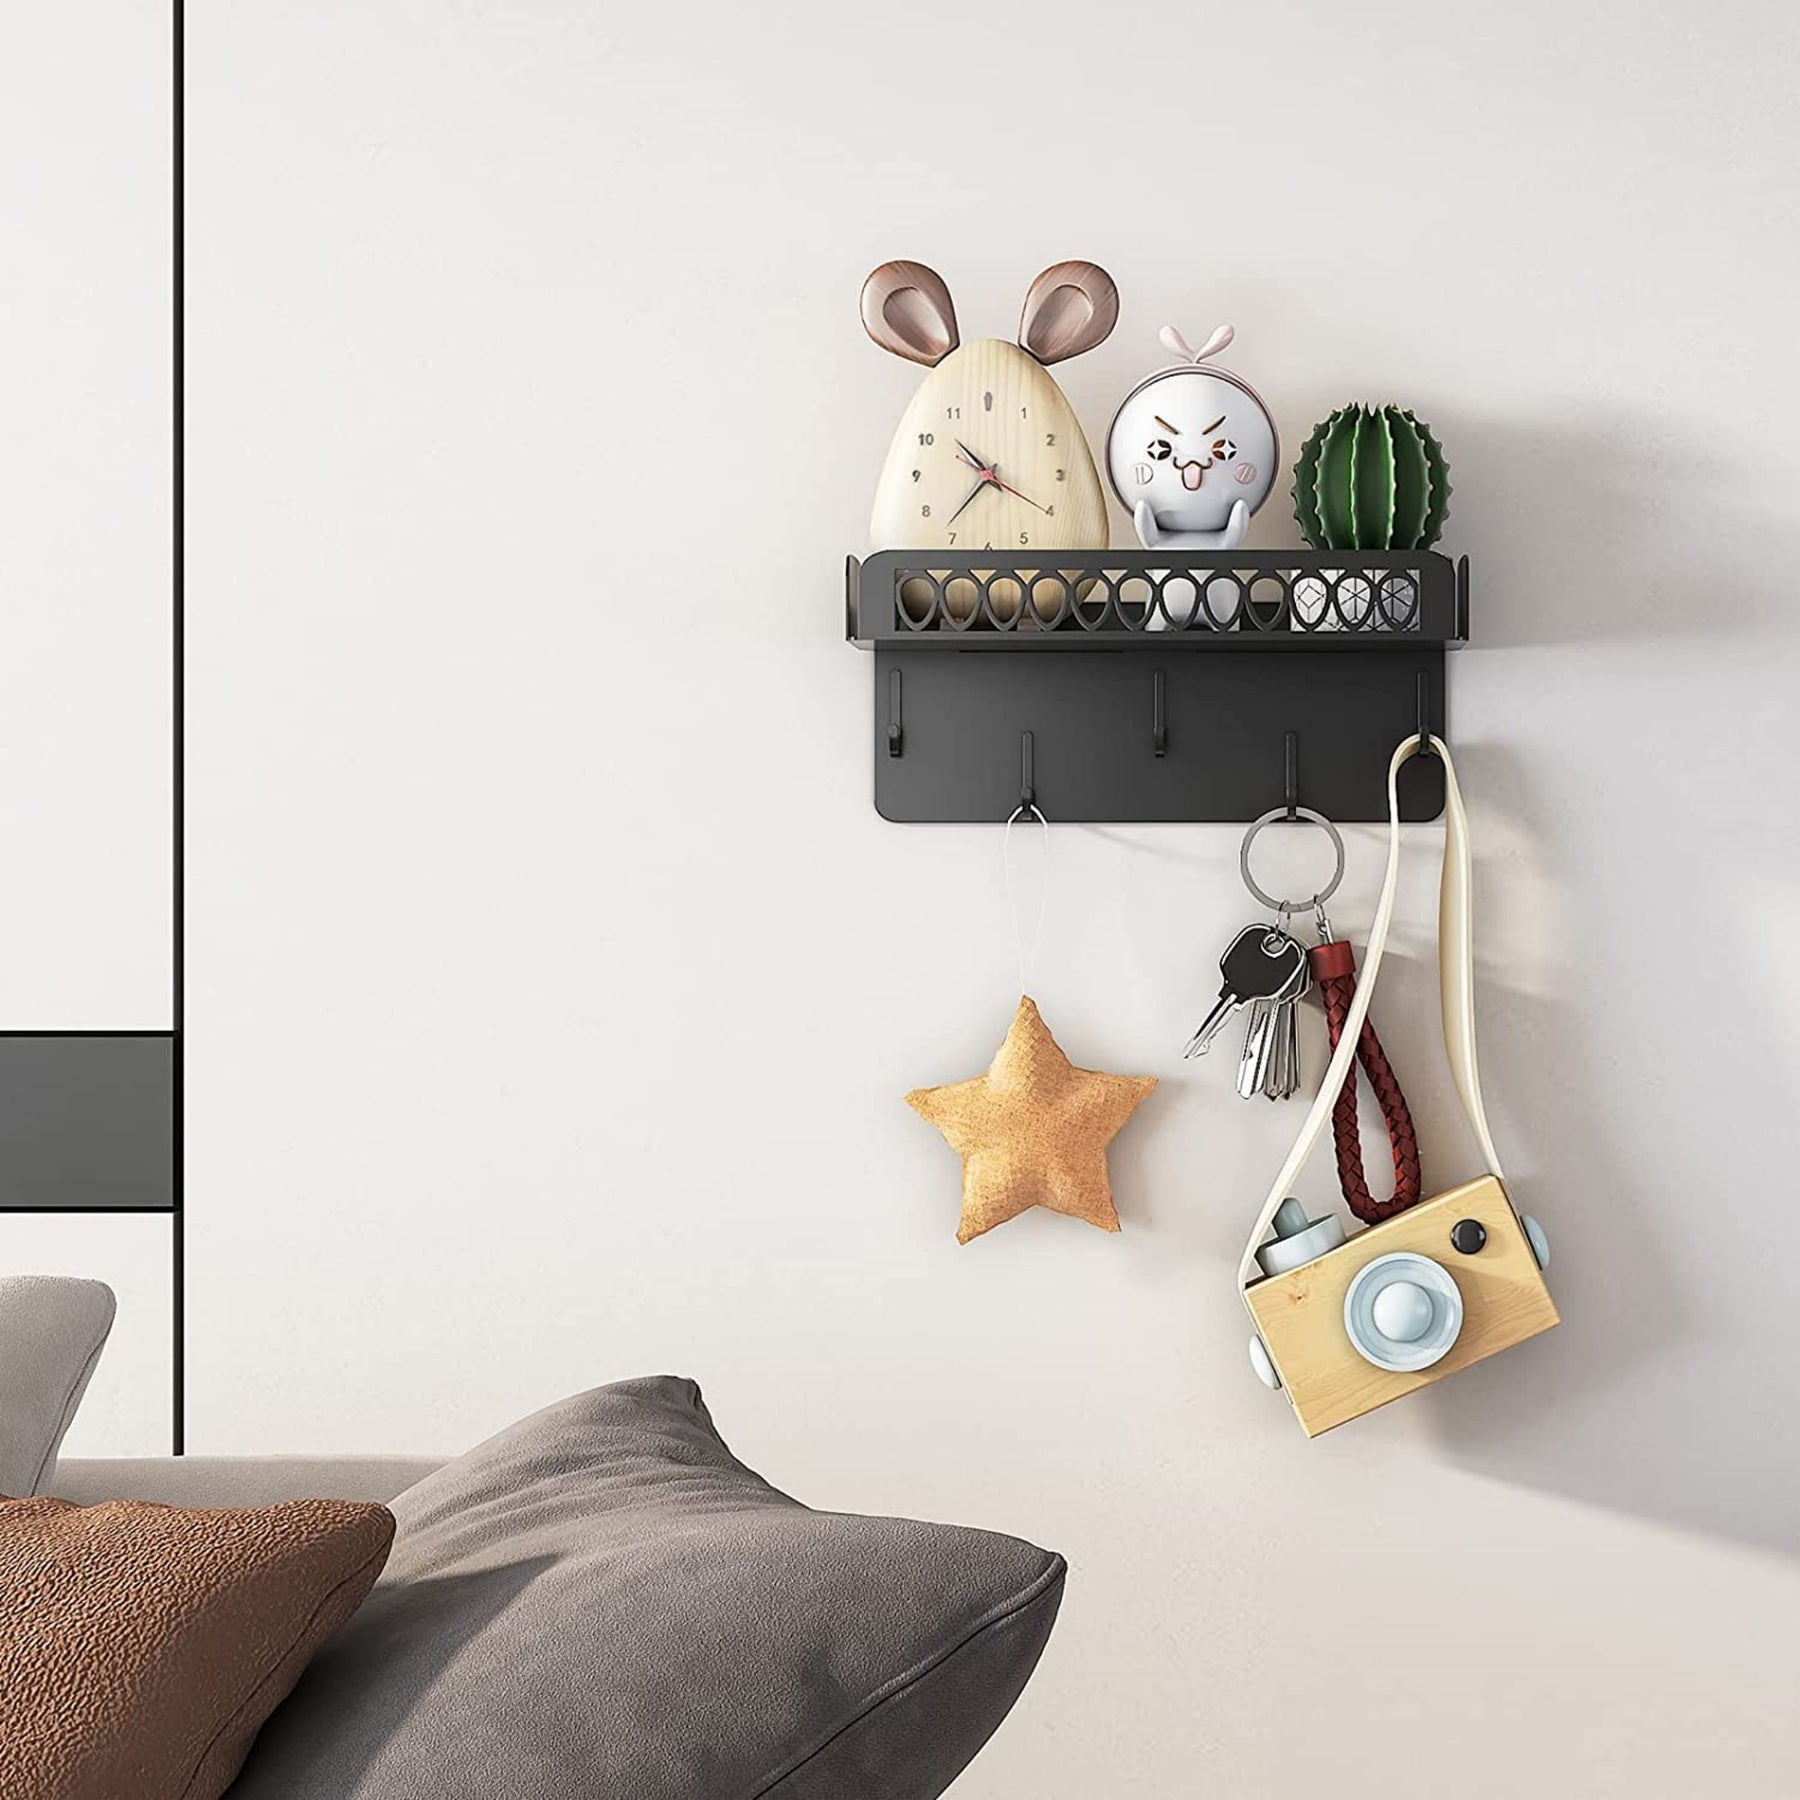 Key hook holder, mail manager and kitchen storage for wall decoration